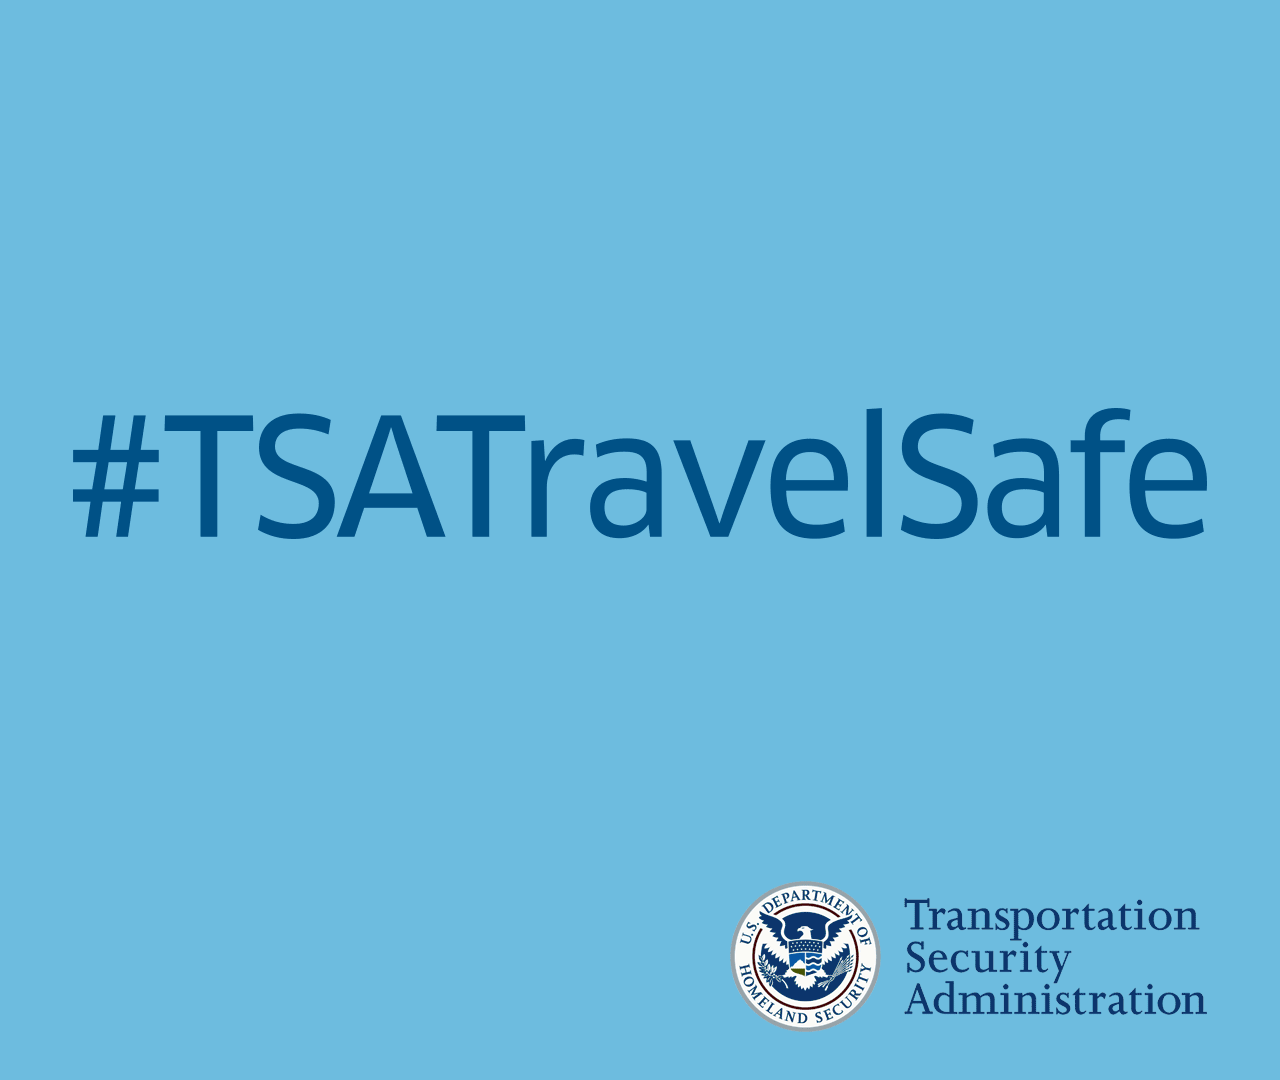 #TSATravelSafe, Transportation Security Administration Seal. Arrive up to 2 hours prior to flight departure for domestic travel, 3 hours for international travel. Remove your 3-1-1 bag and place in a screening bin. Remove computers and large electronics from carry-on and place in bin alone. Have ID and boarding pass out for inspection. Remove shoes and place directly on x-ray belt. Remember to check bins and collect all belongings.